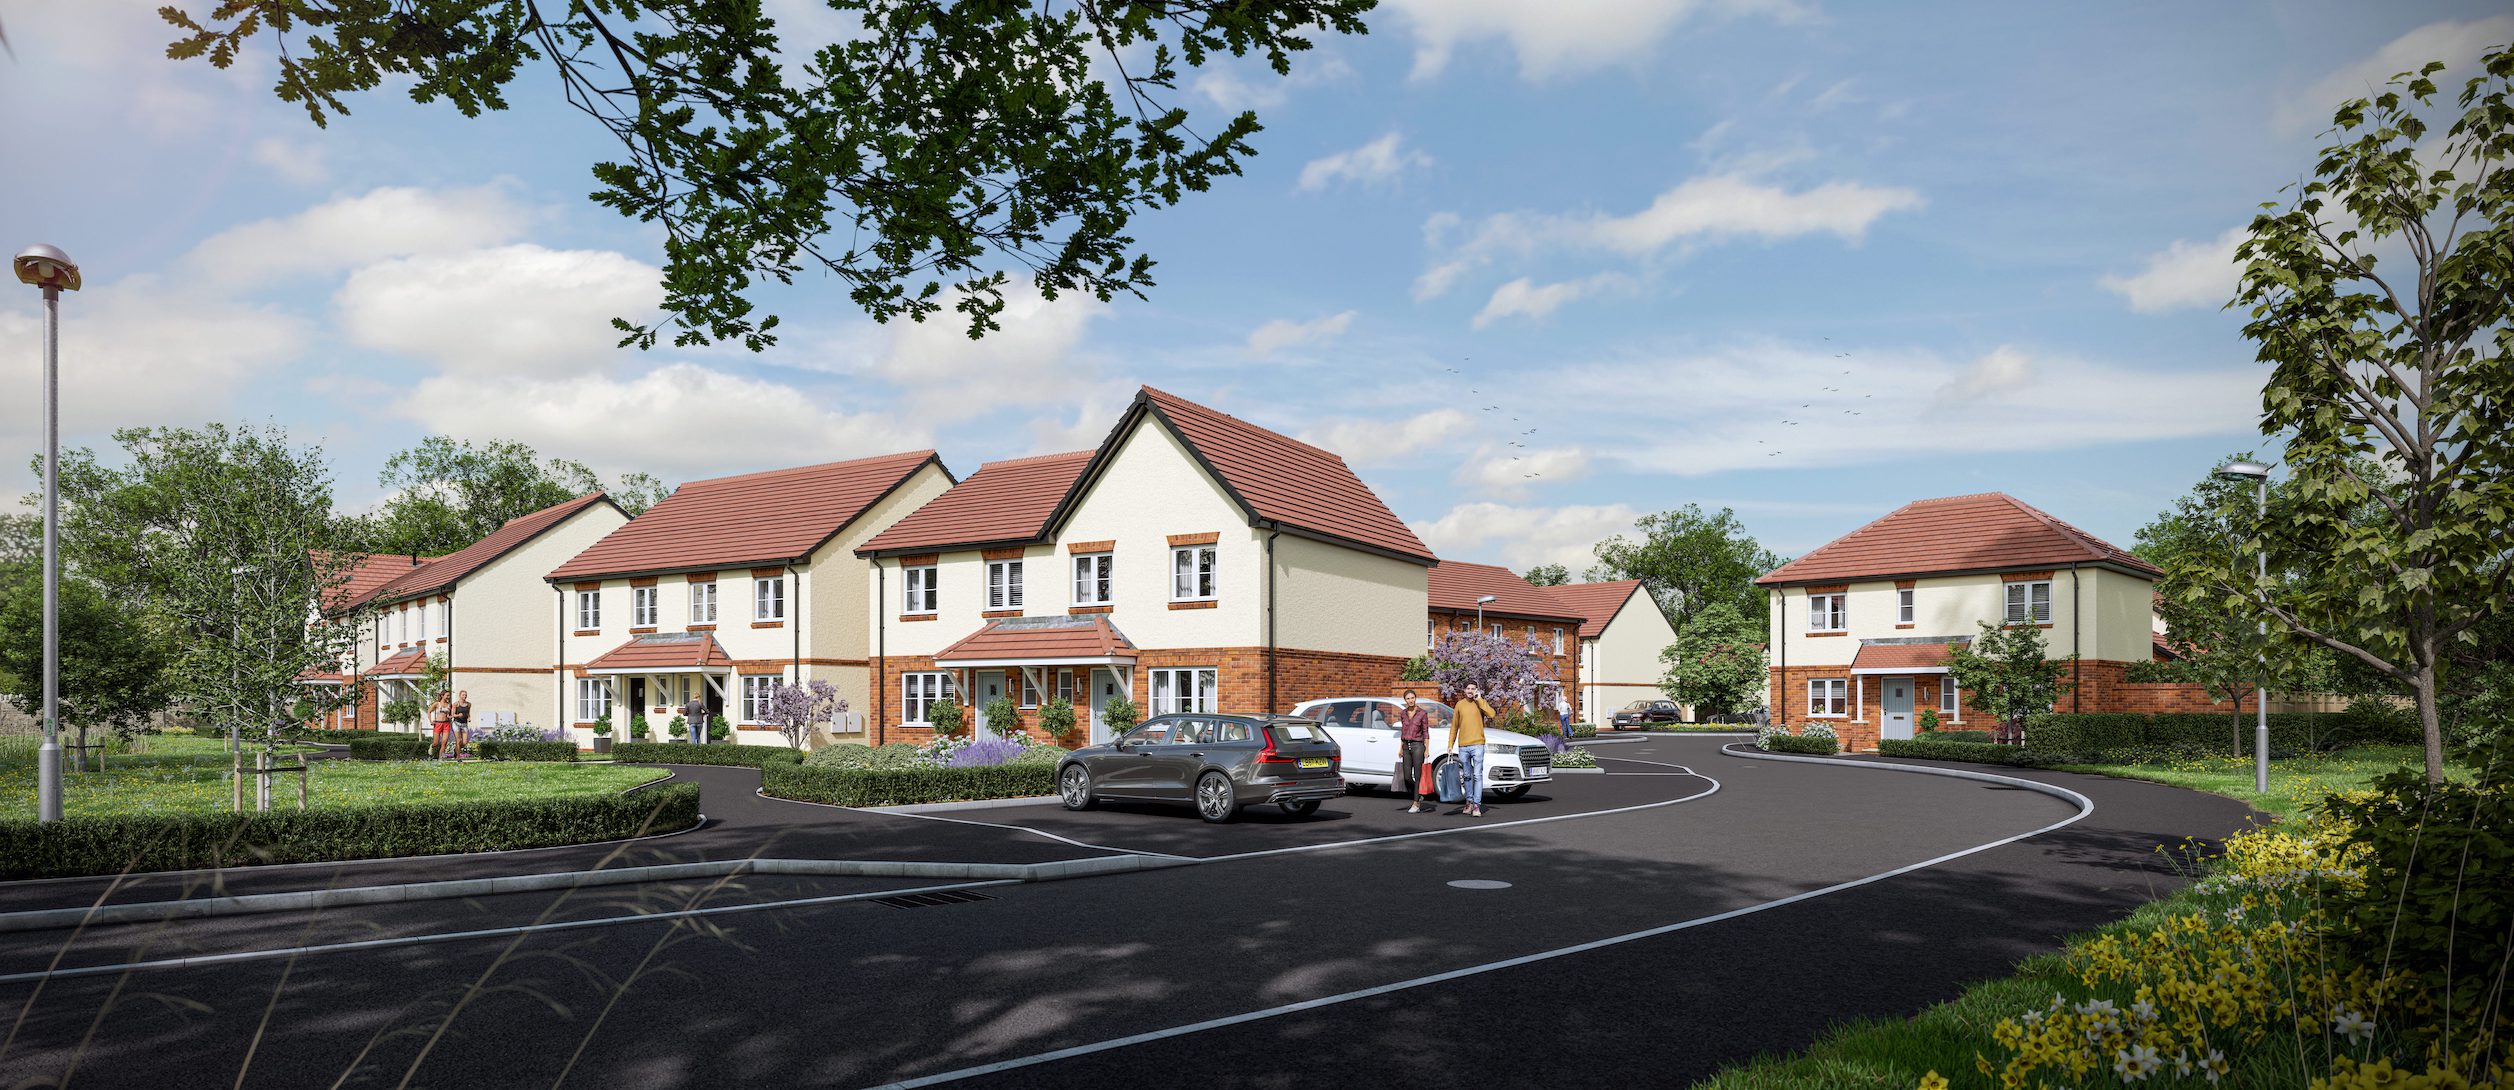 Summerfield Homes Open the Show Home at Carrots Farm, North Petherton